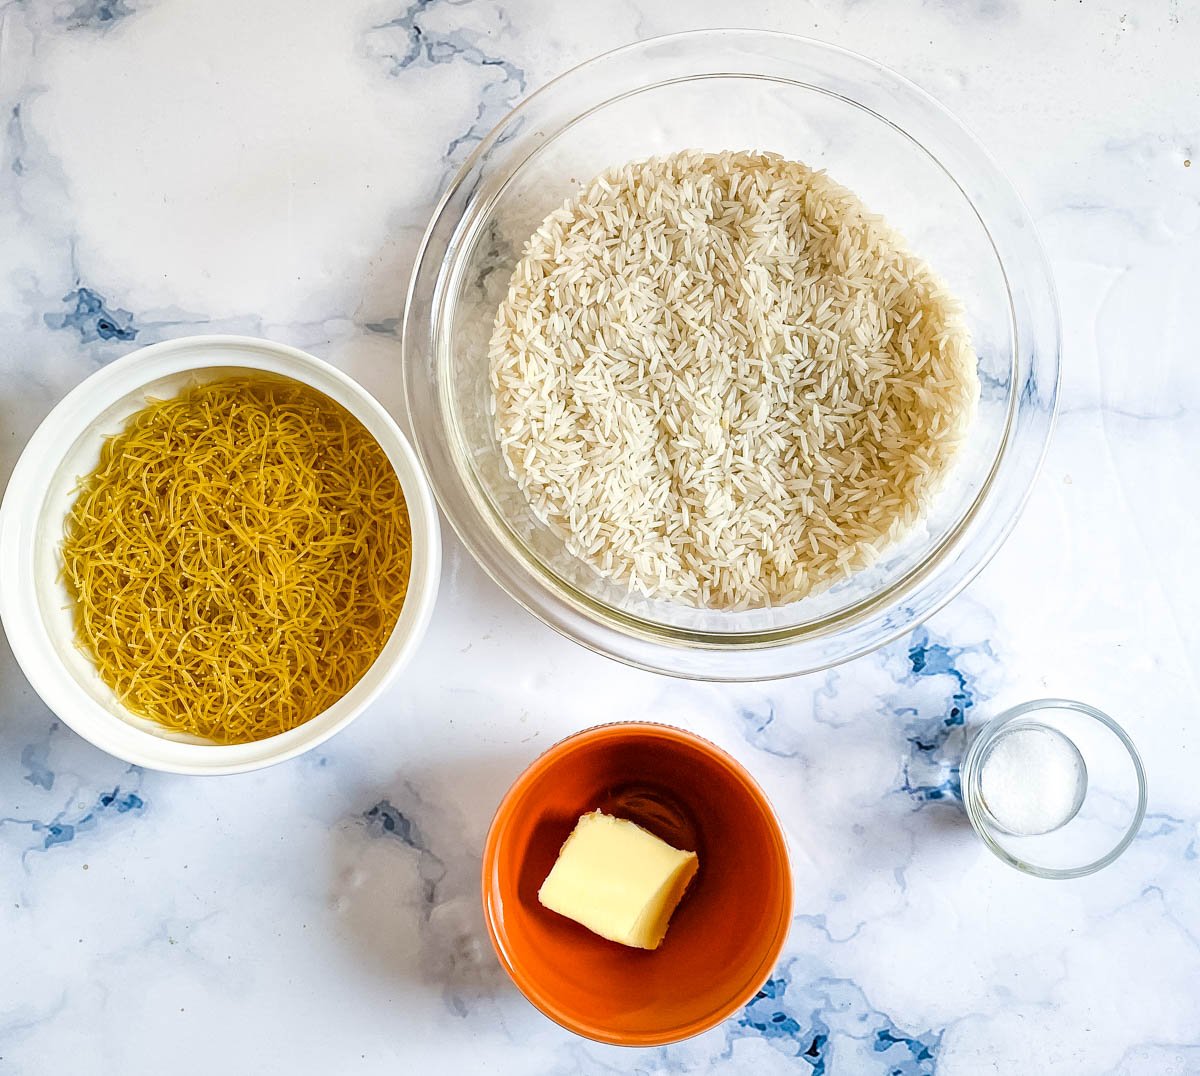 Ingredients needed to make Lebanese Rice: basmati rice, vermicelli pasta, butter, and salt. 